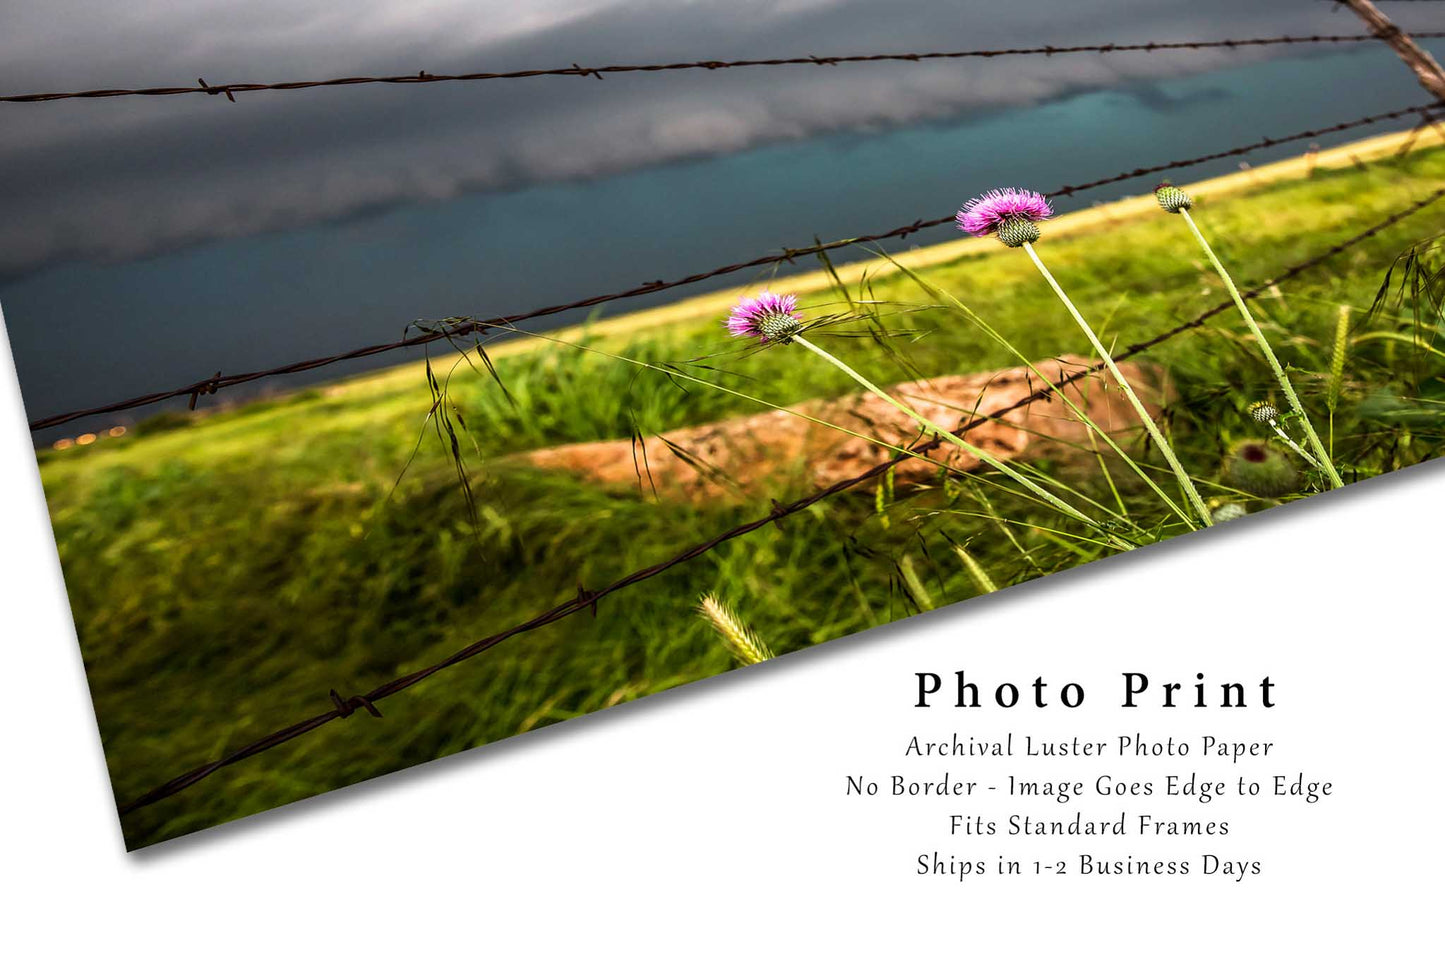 Western Photography Print - Wall Art Picture of Pink Thistle Flower and Barbed Wire Fence with Approaching Storm in Texas Country Decor